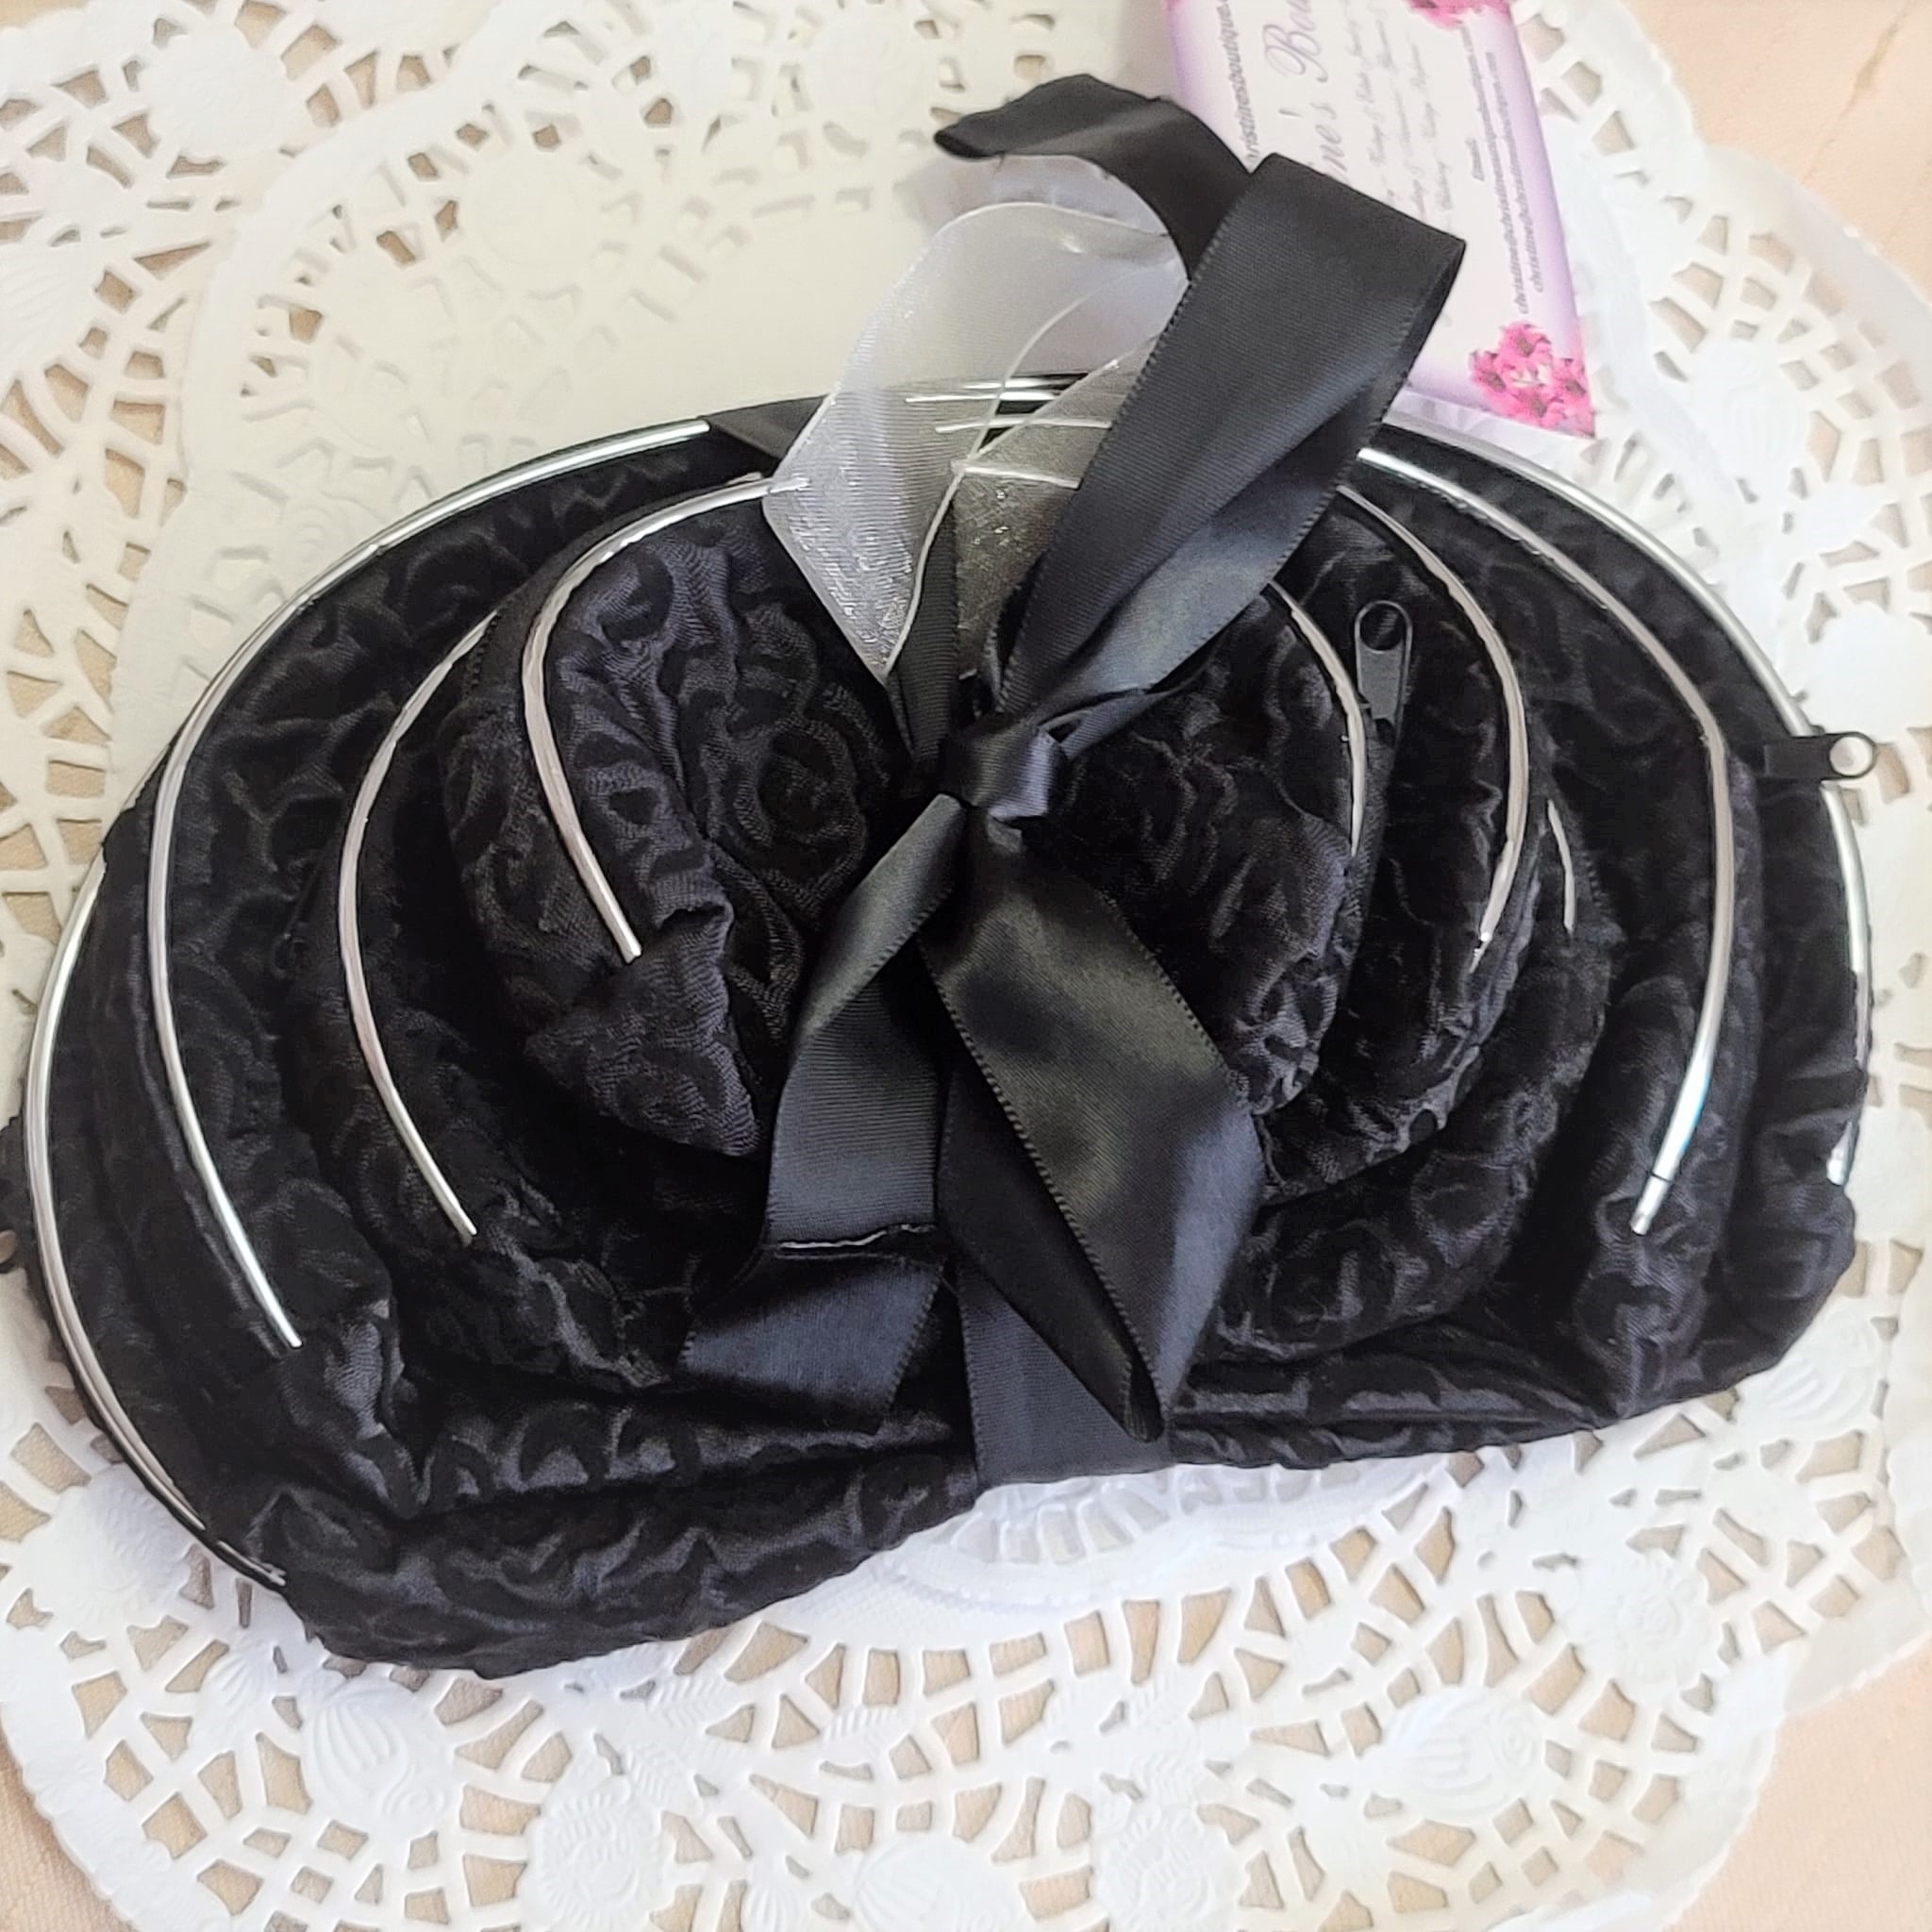 Set of 5 Black Satin Rose Pattern Cosmetic Bags - Click Image to Close